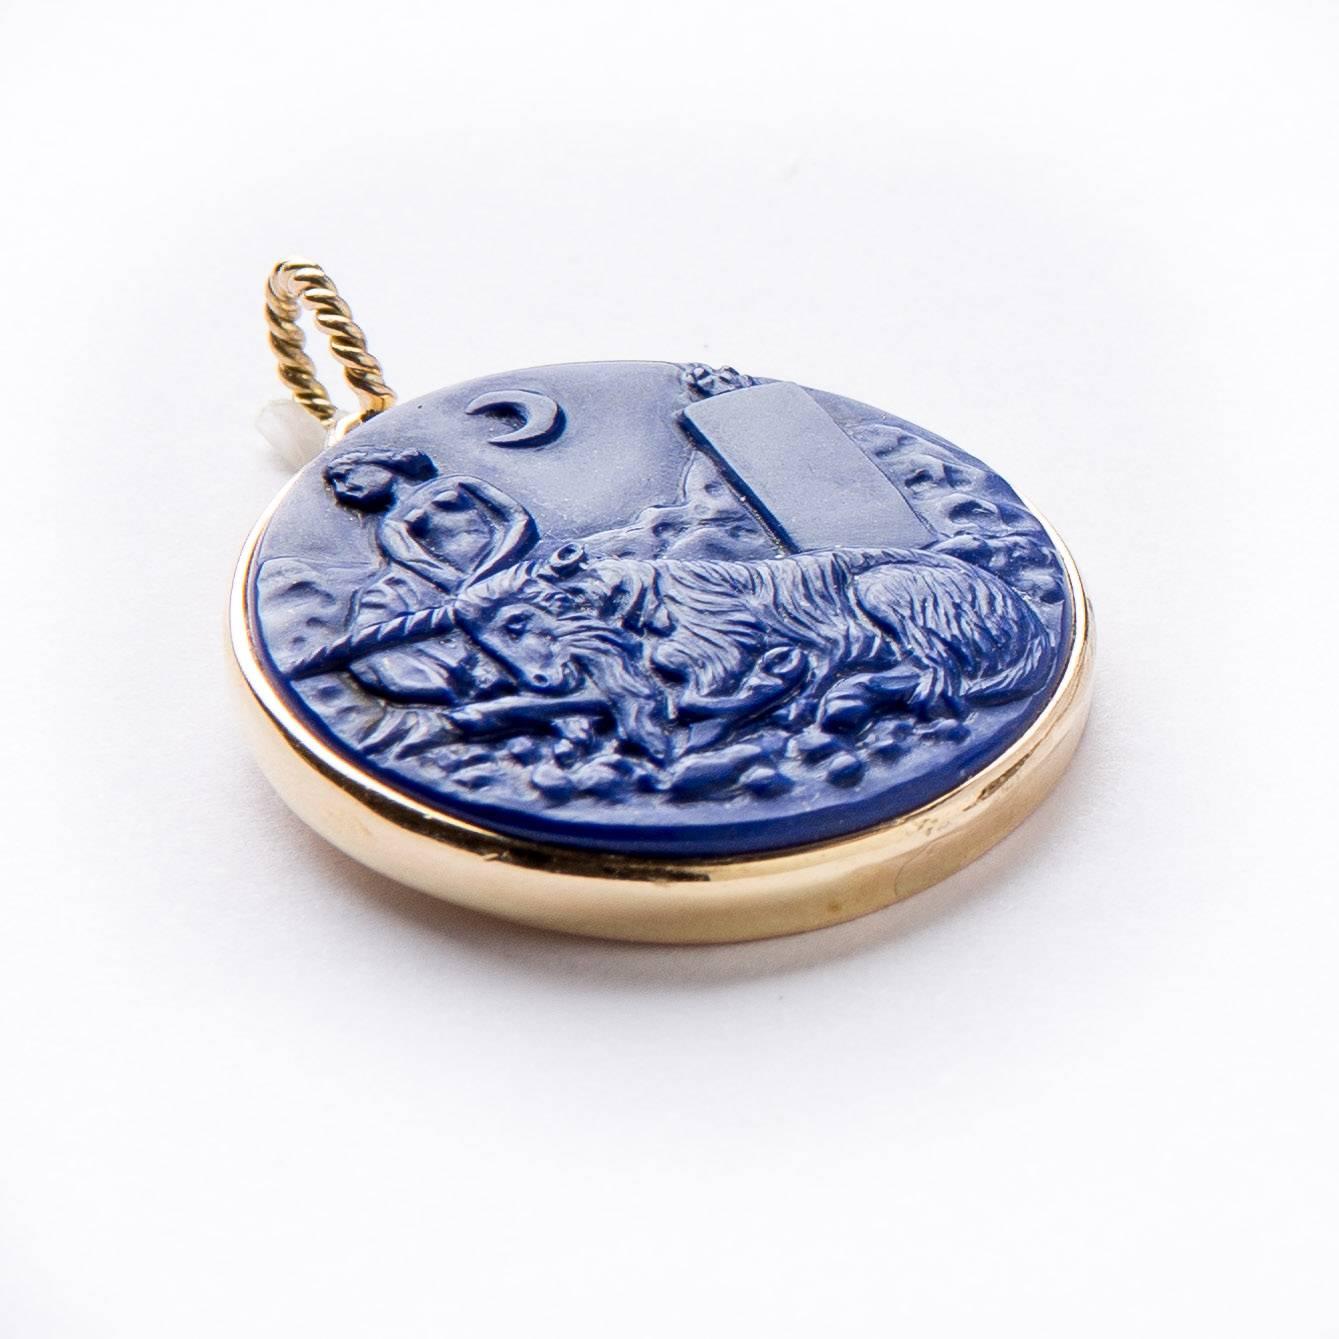 Beautifully hand carved in lapis lazuli re-creation, in high relief, of Pisanello's medal of a young woman, unicorn, crescent moon and convent tower. Italian portrait from the 14th century portraying both innocence and knowledge carries with it the